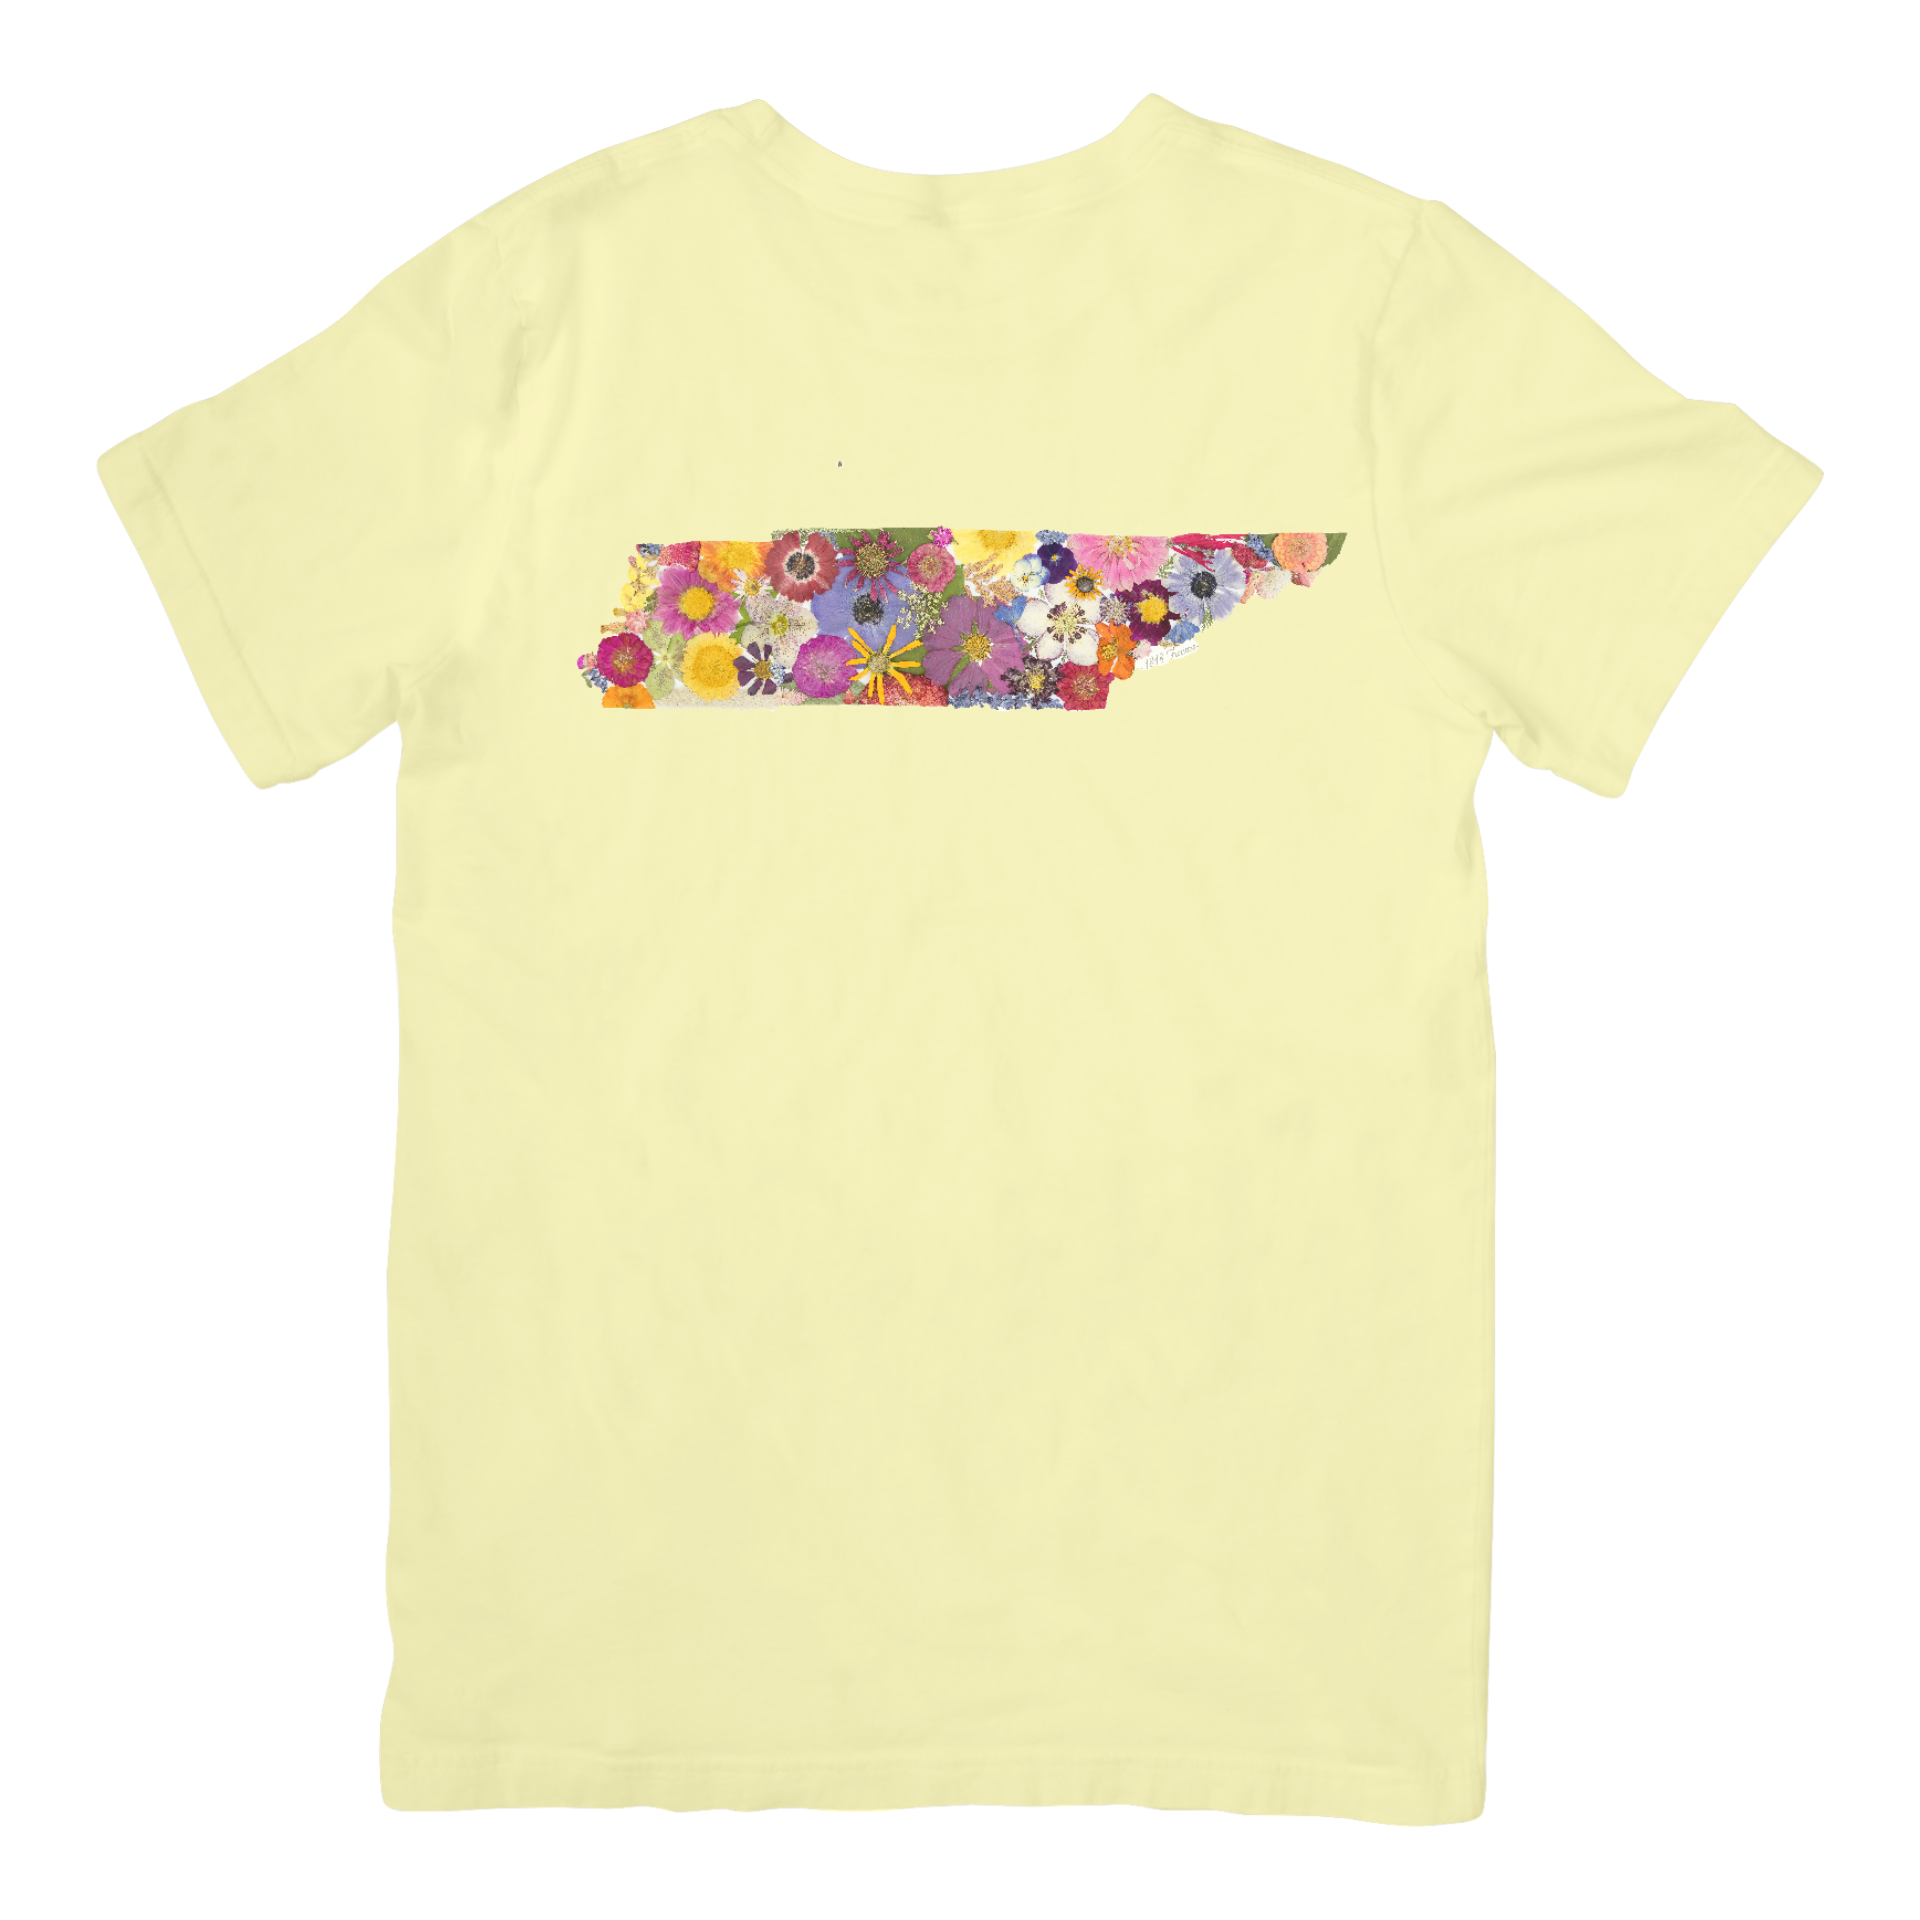 State Themed Comfort Colors Tshirt - "Where I Bloom" Collection TShirt 1818 Farms Tennesse Banana Yellow Small